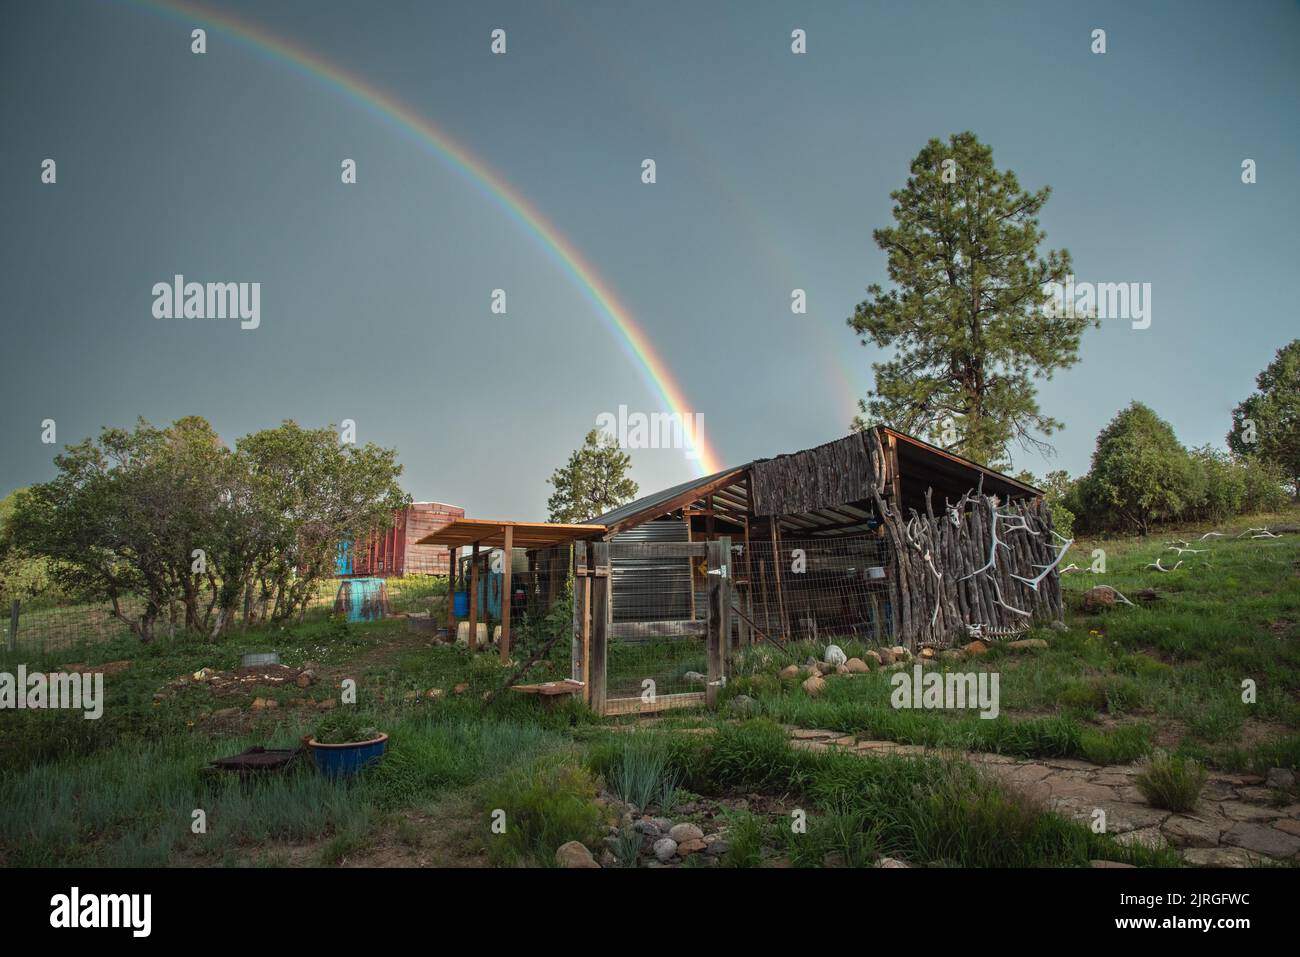 Double rainbow, pine trees and a shed in a garden with a coyote fence decorated with antlers. Stock Photo